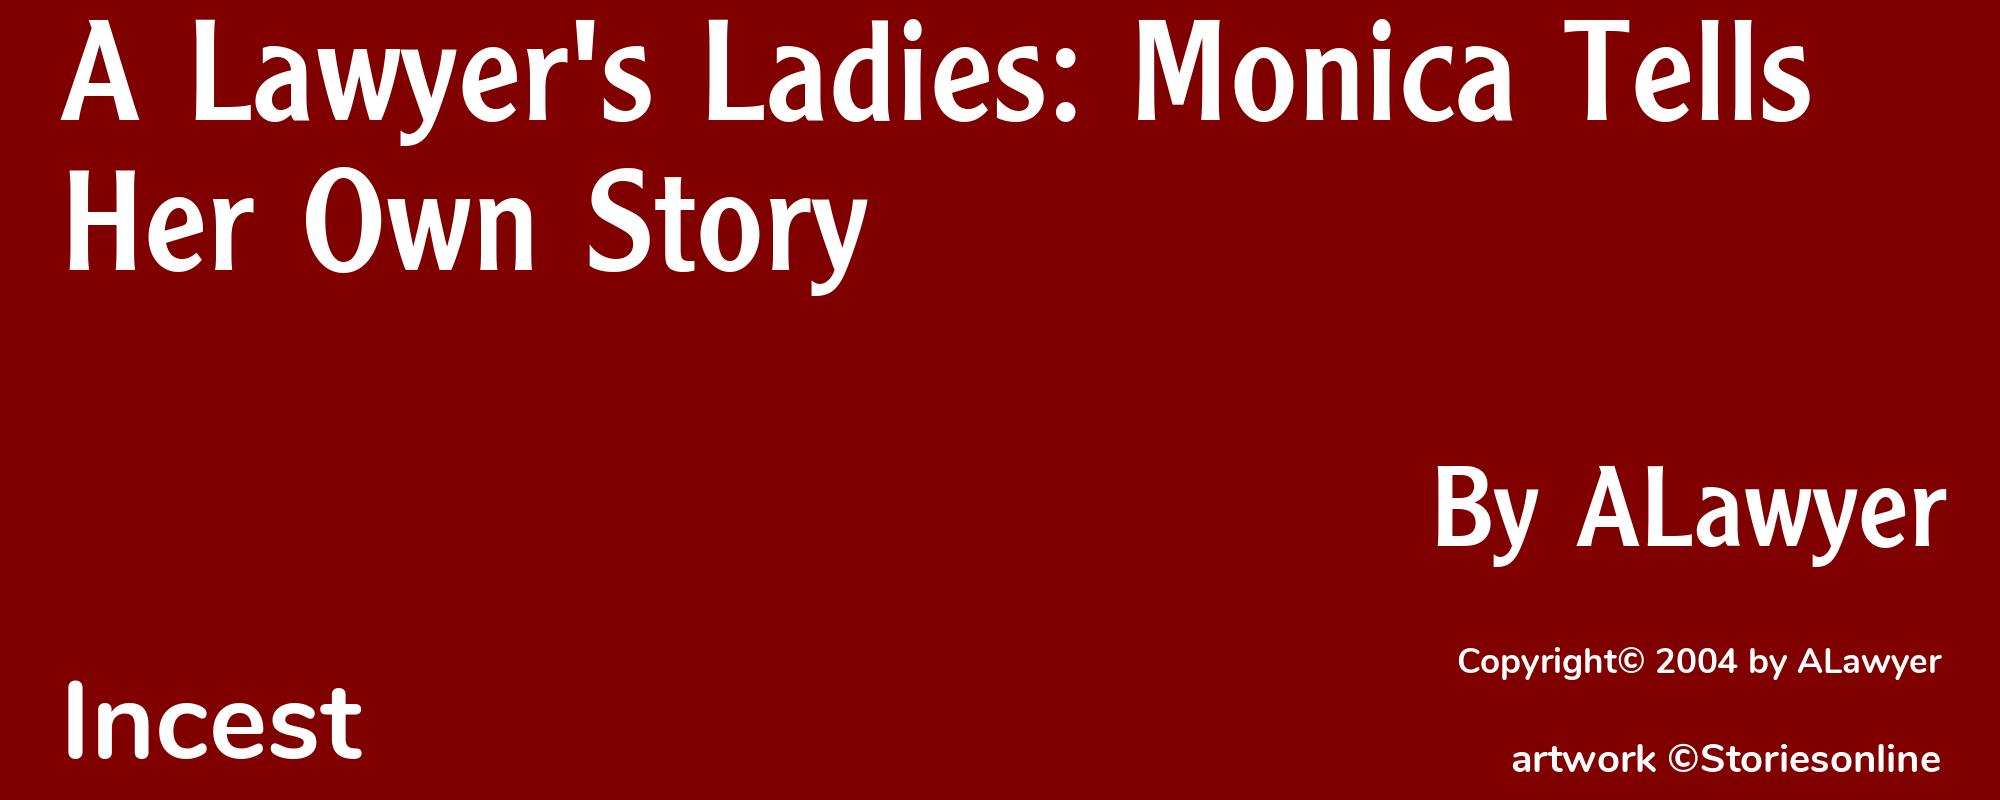 A Lawyer's Ladies: Monica Tells Her Own Story - Cover